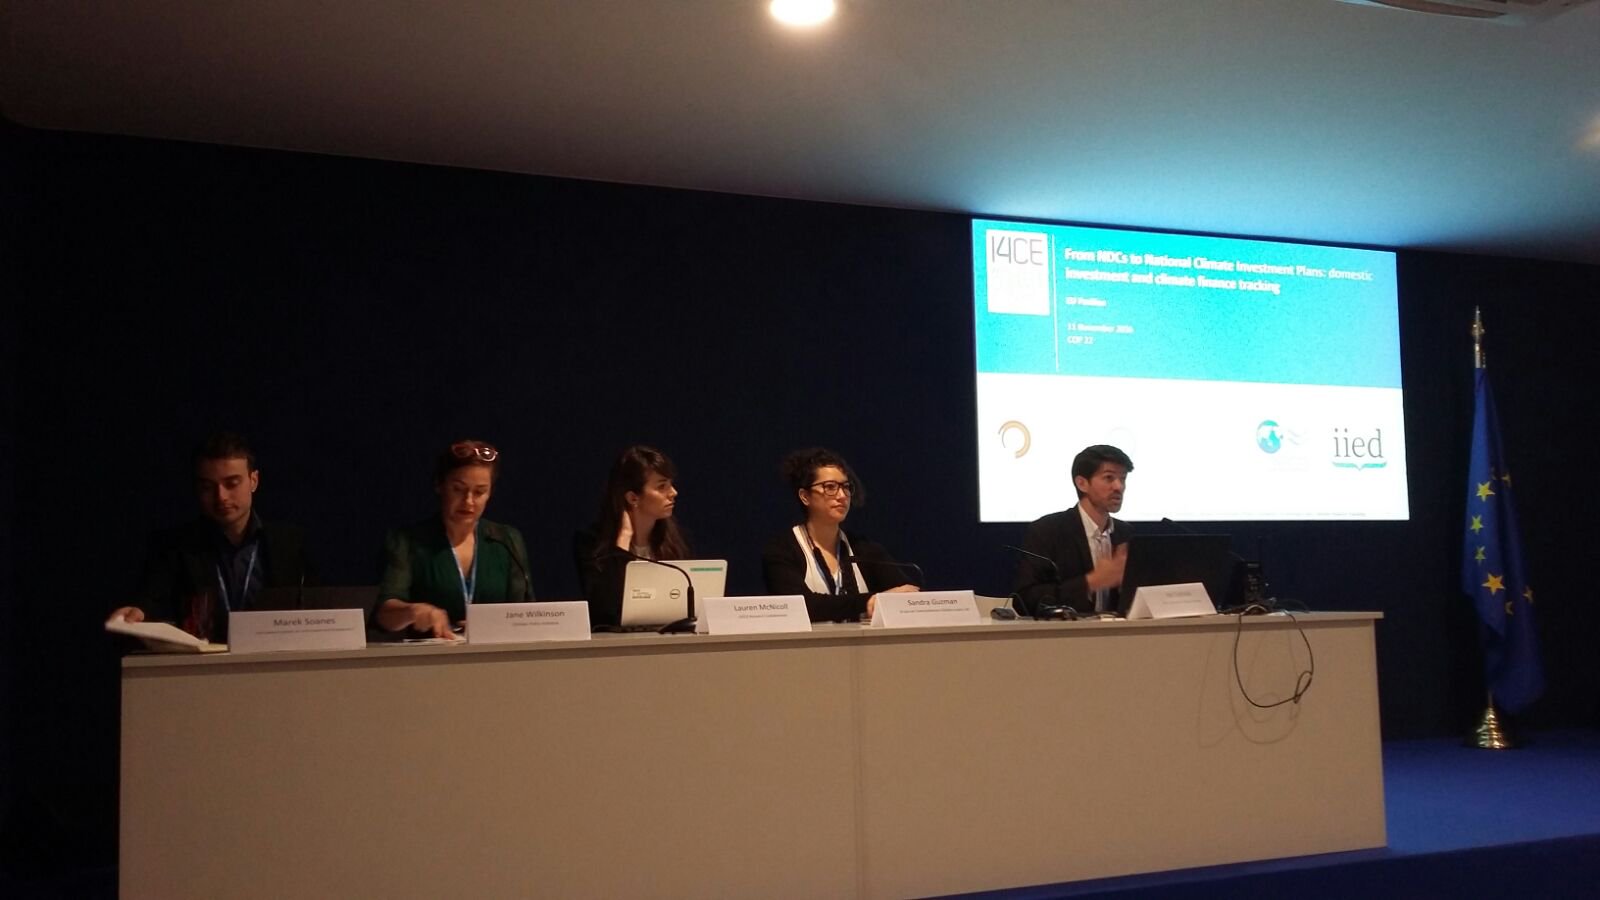 Happy to gather the experience of @GrupoGFLAC @OECD_ENV @climatepolicy @IIED and @i4CE in our domestic #climatefinance event at #COP22! https://t.co/es4E6YsKRo